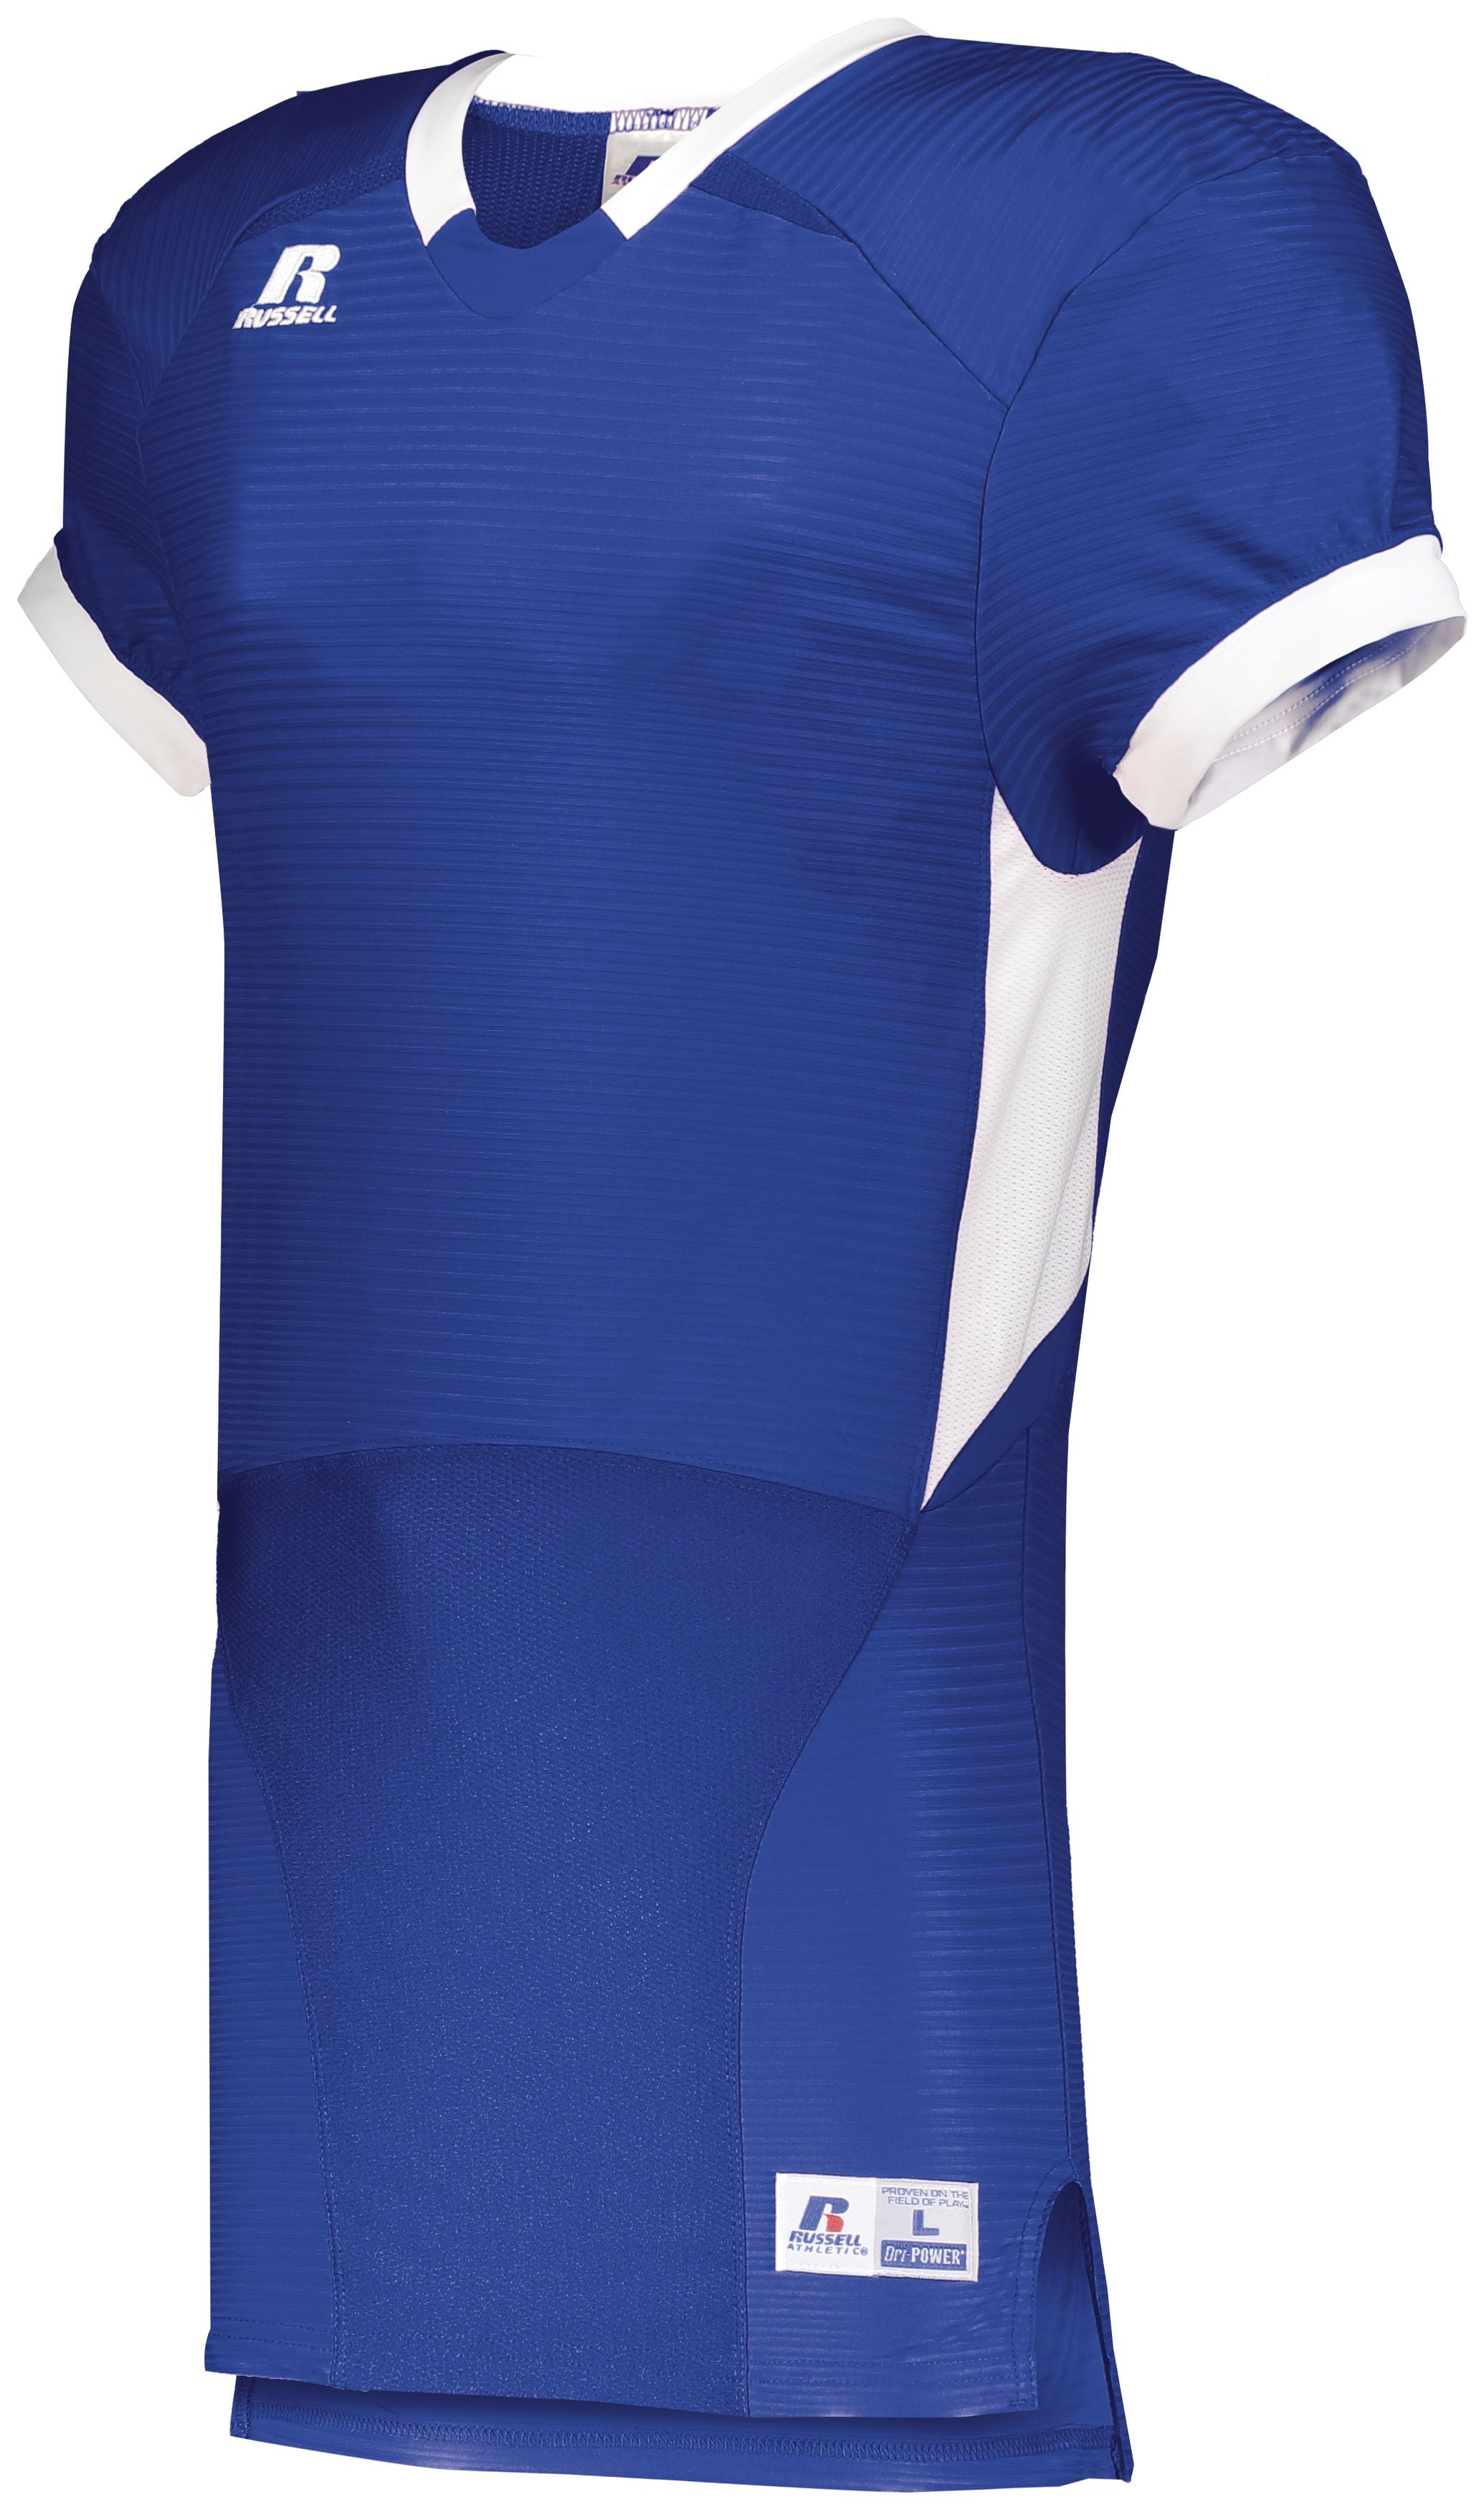 Russell Athletic Color Block Game Jersey in Royal/White  -Part of the Adult, Adult-Jersey, Football, Russell-Athletic-Products, Shirts, All-Sports, All-Sports-1 product lines at KanaleyCreations.com